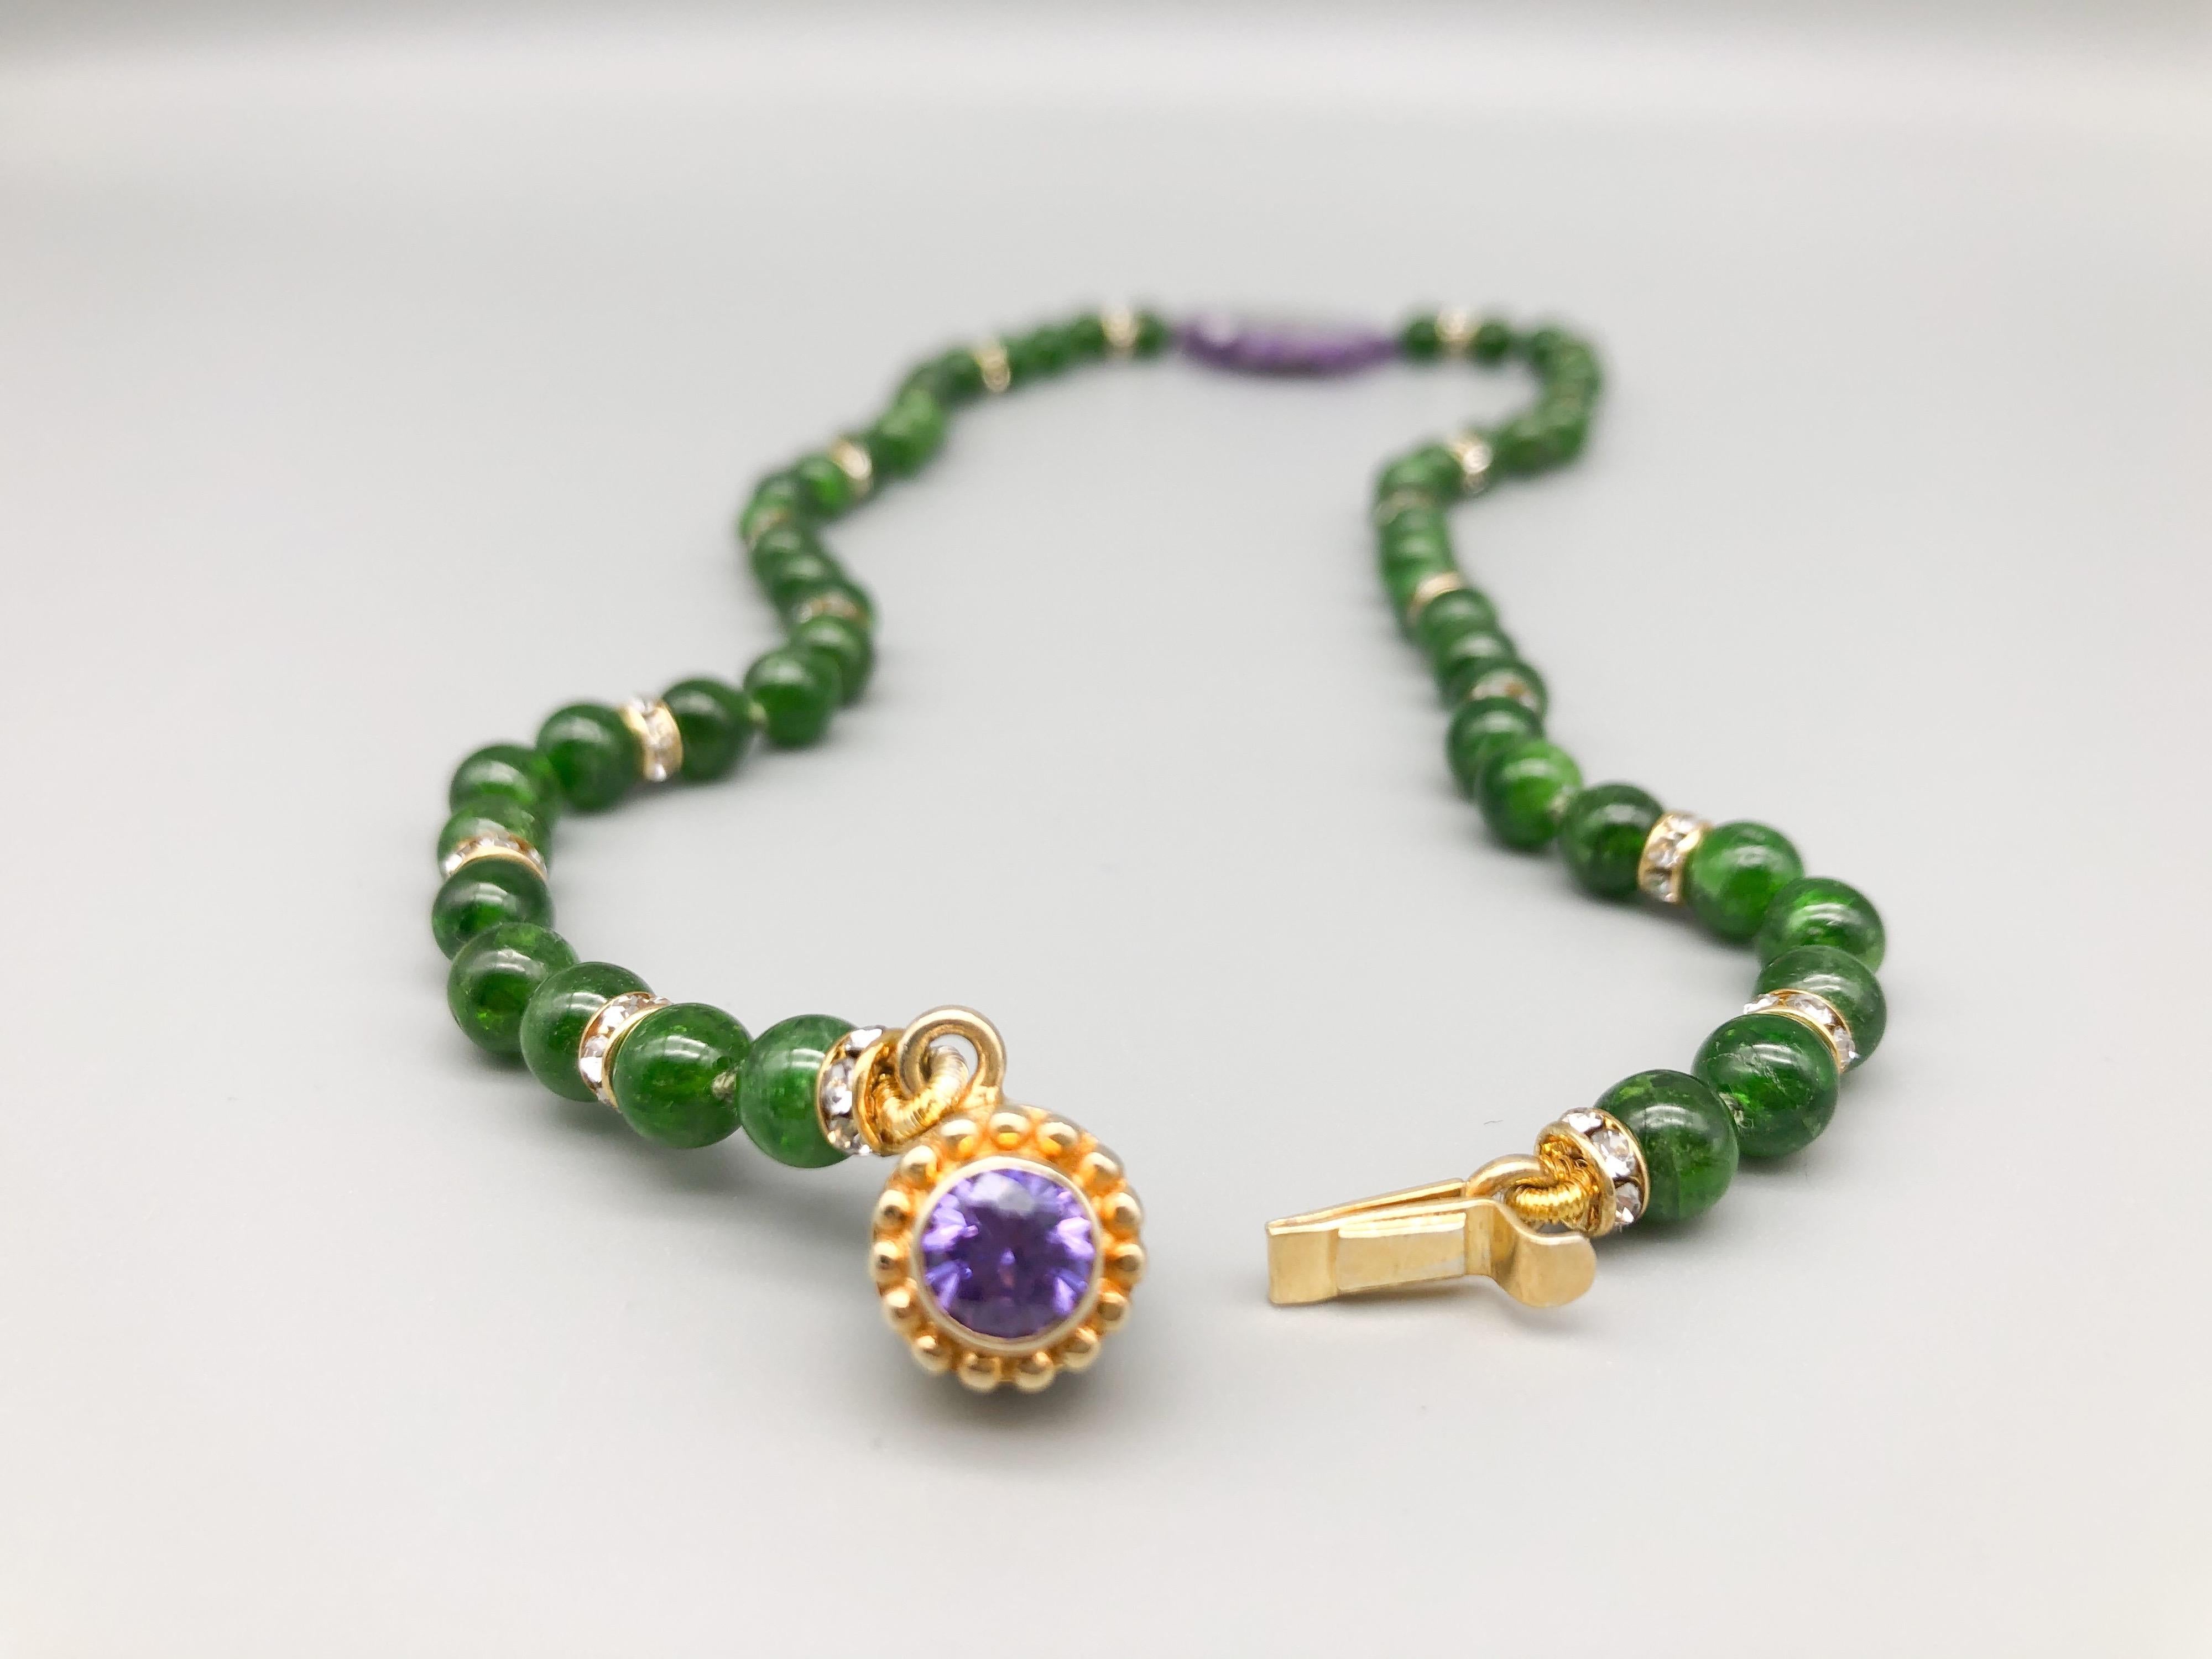 A.Jeschel Chrome Diopside beads with an Amethyst Stalactite Pendant. For Sale 1